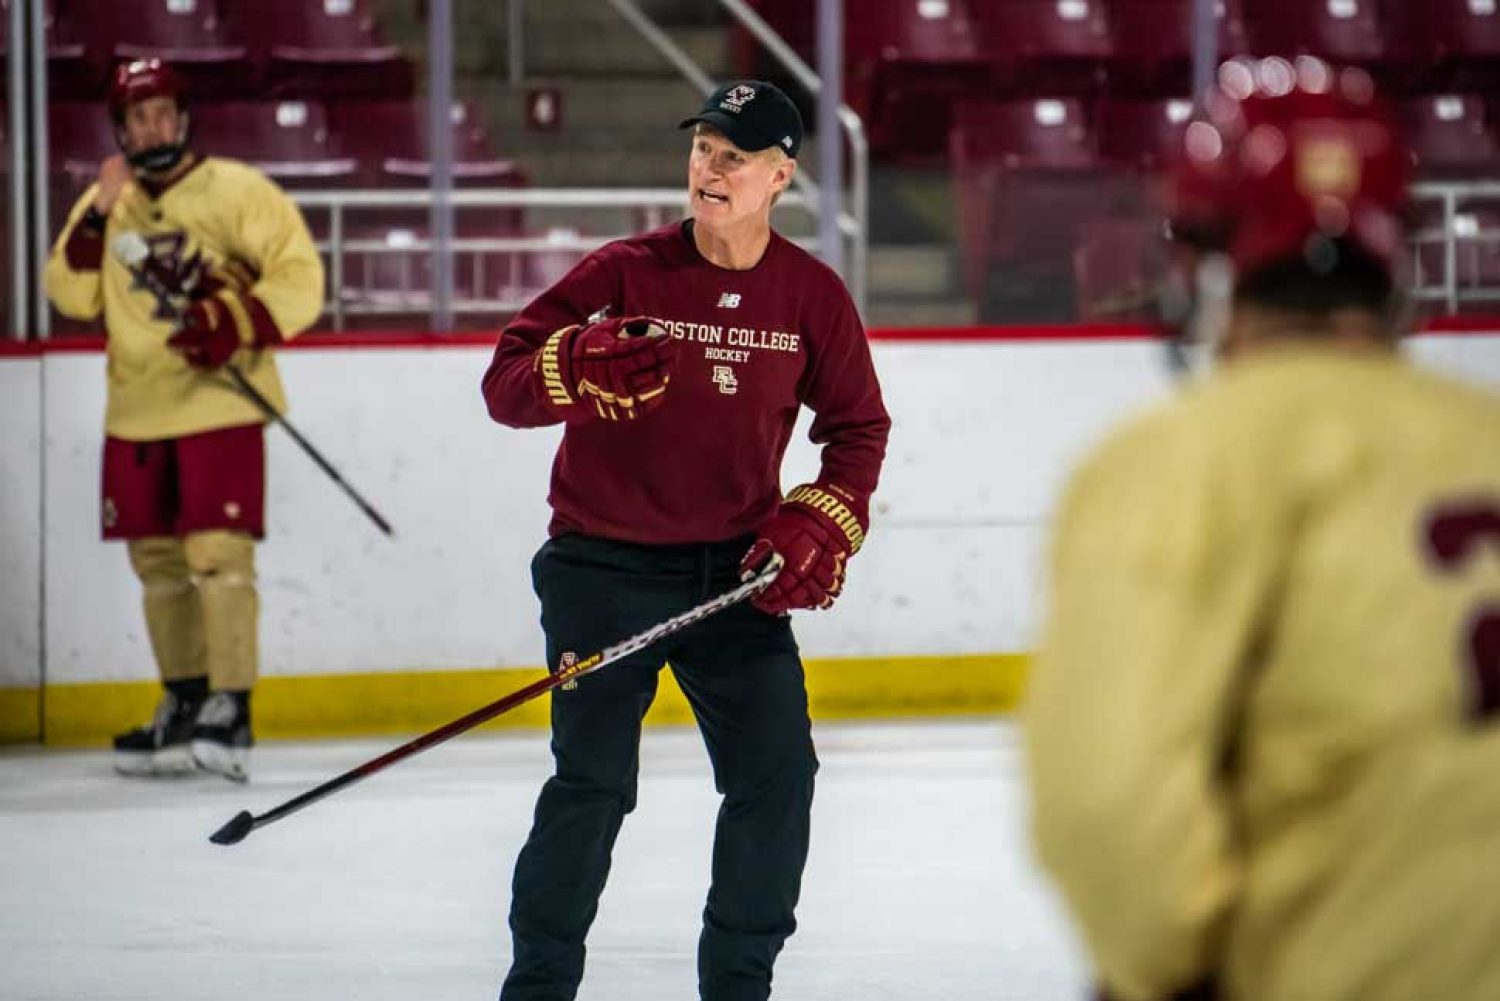 Coach Greg Brown coaching on ice with players.